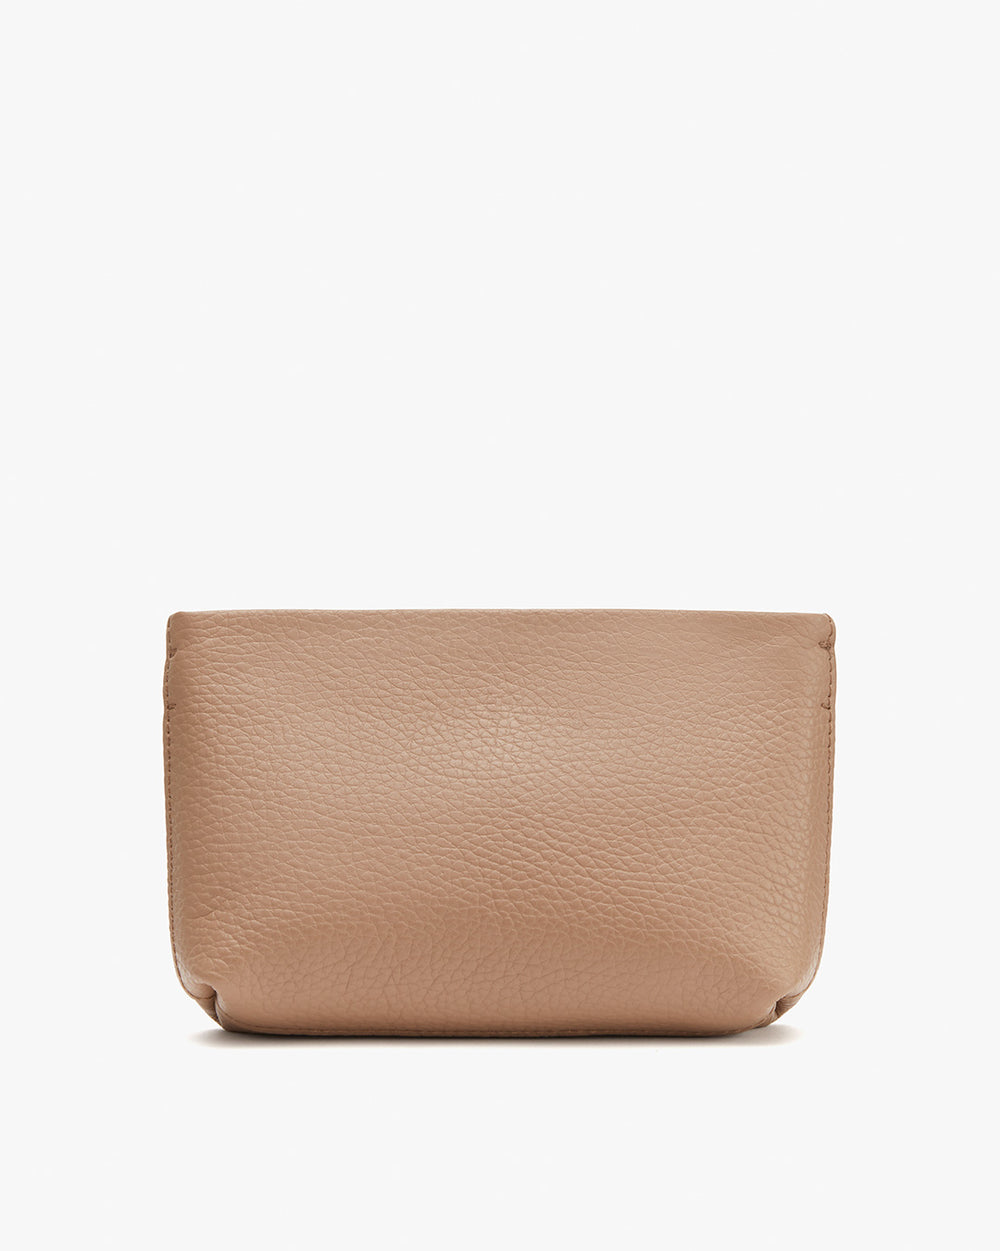 Leather pouch against a plain background